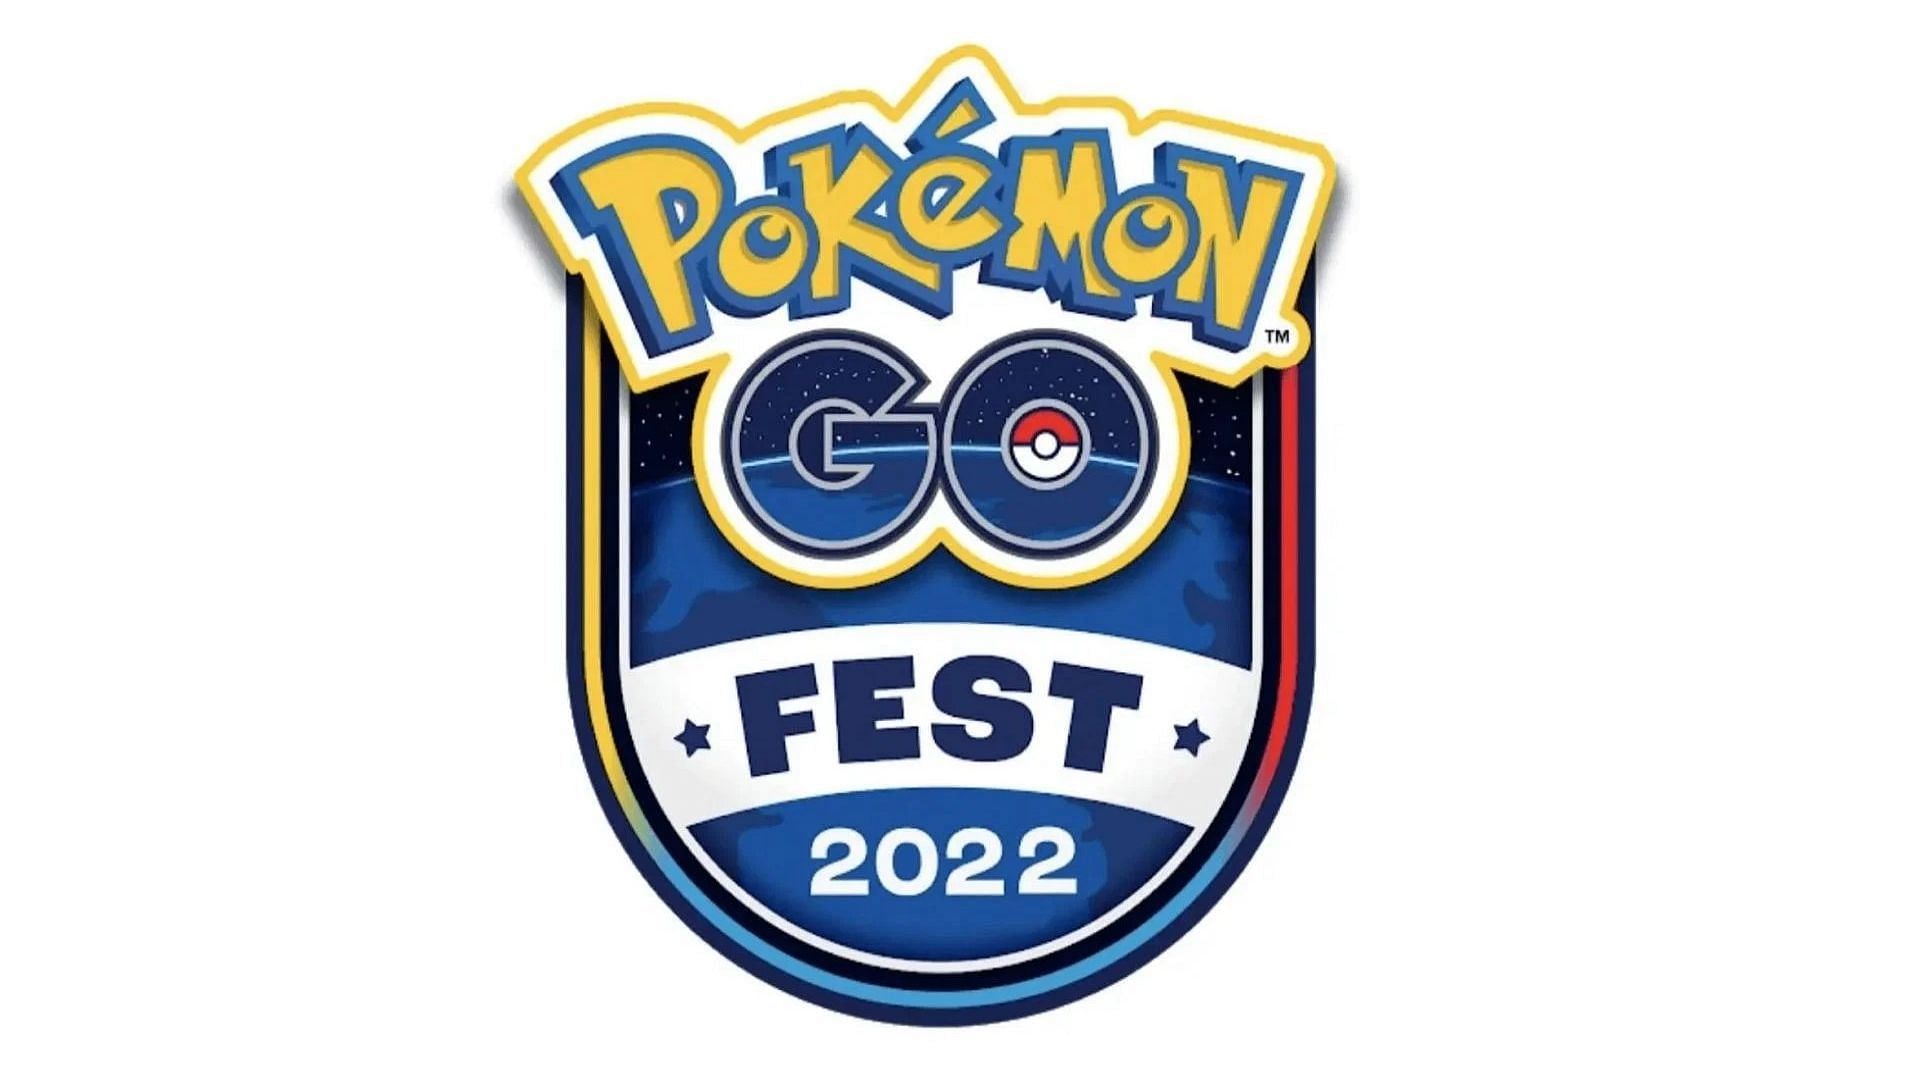 Pokemon GO Fest 2022 can be attended remotely, but a live event is also returning, beginning in Berlin, Germany (Image via Niantic)